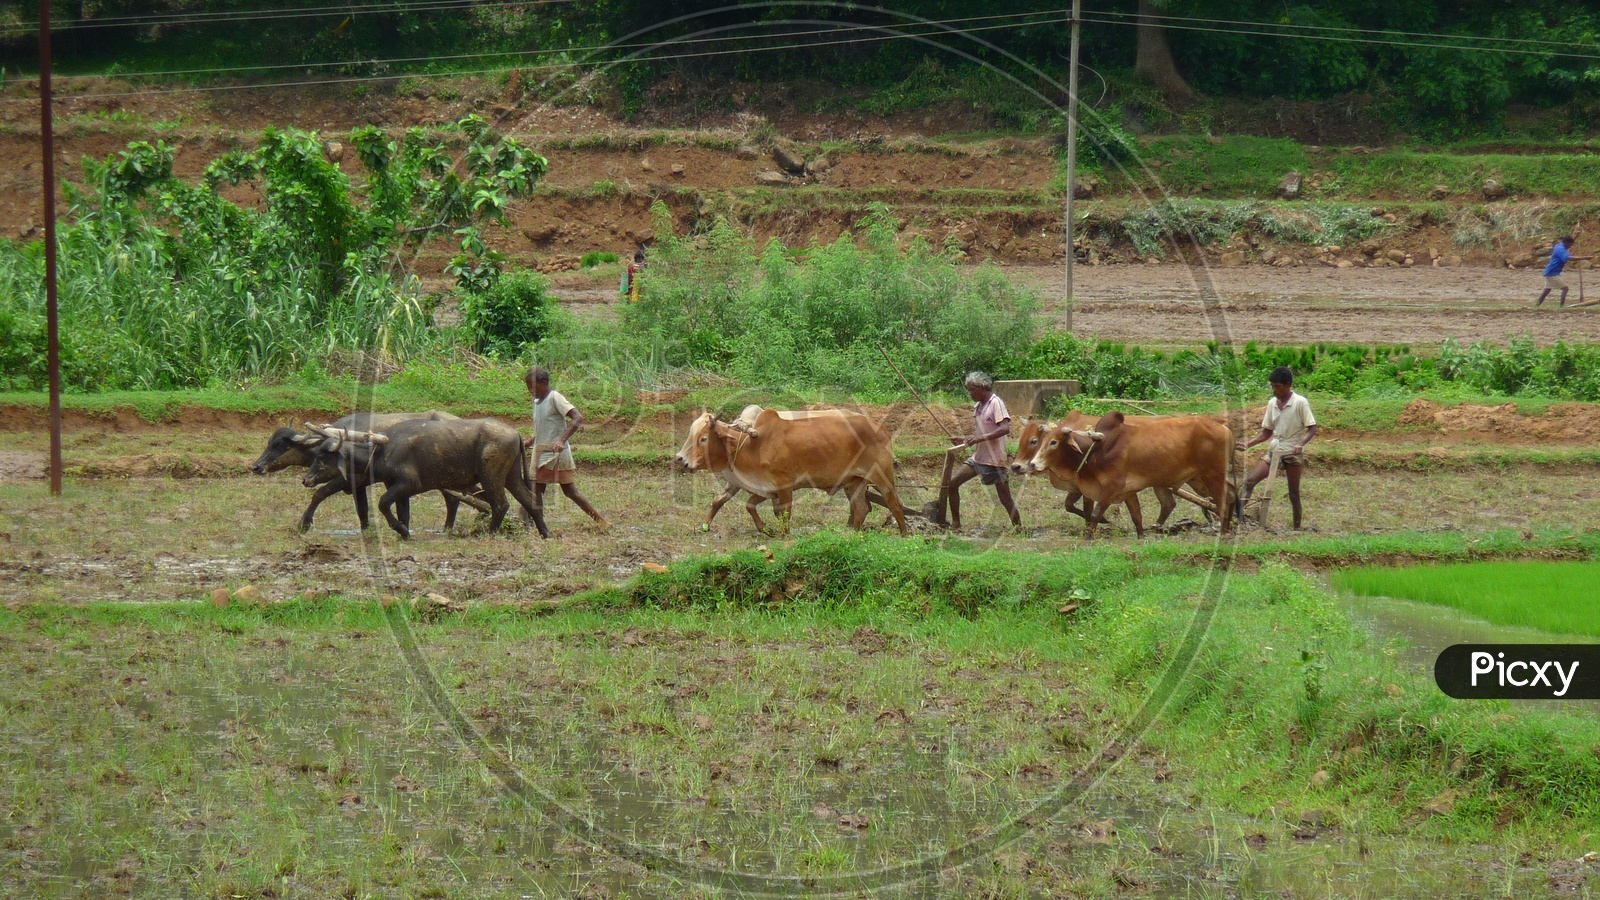 Ploughing with Bullock carts in Agriculture Field